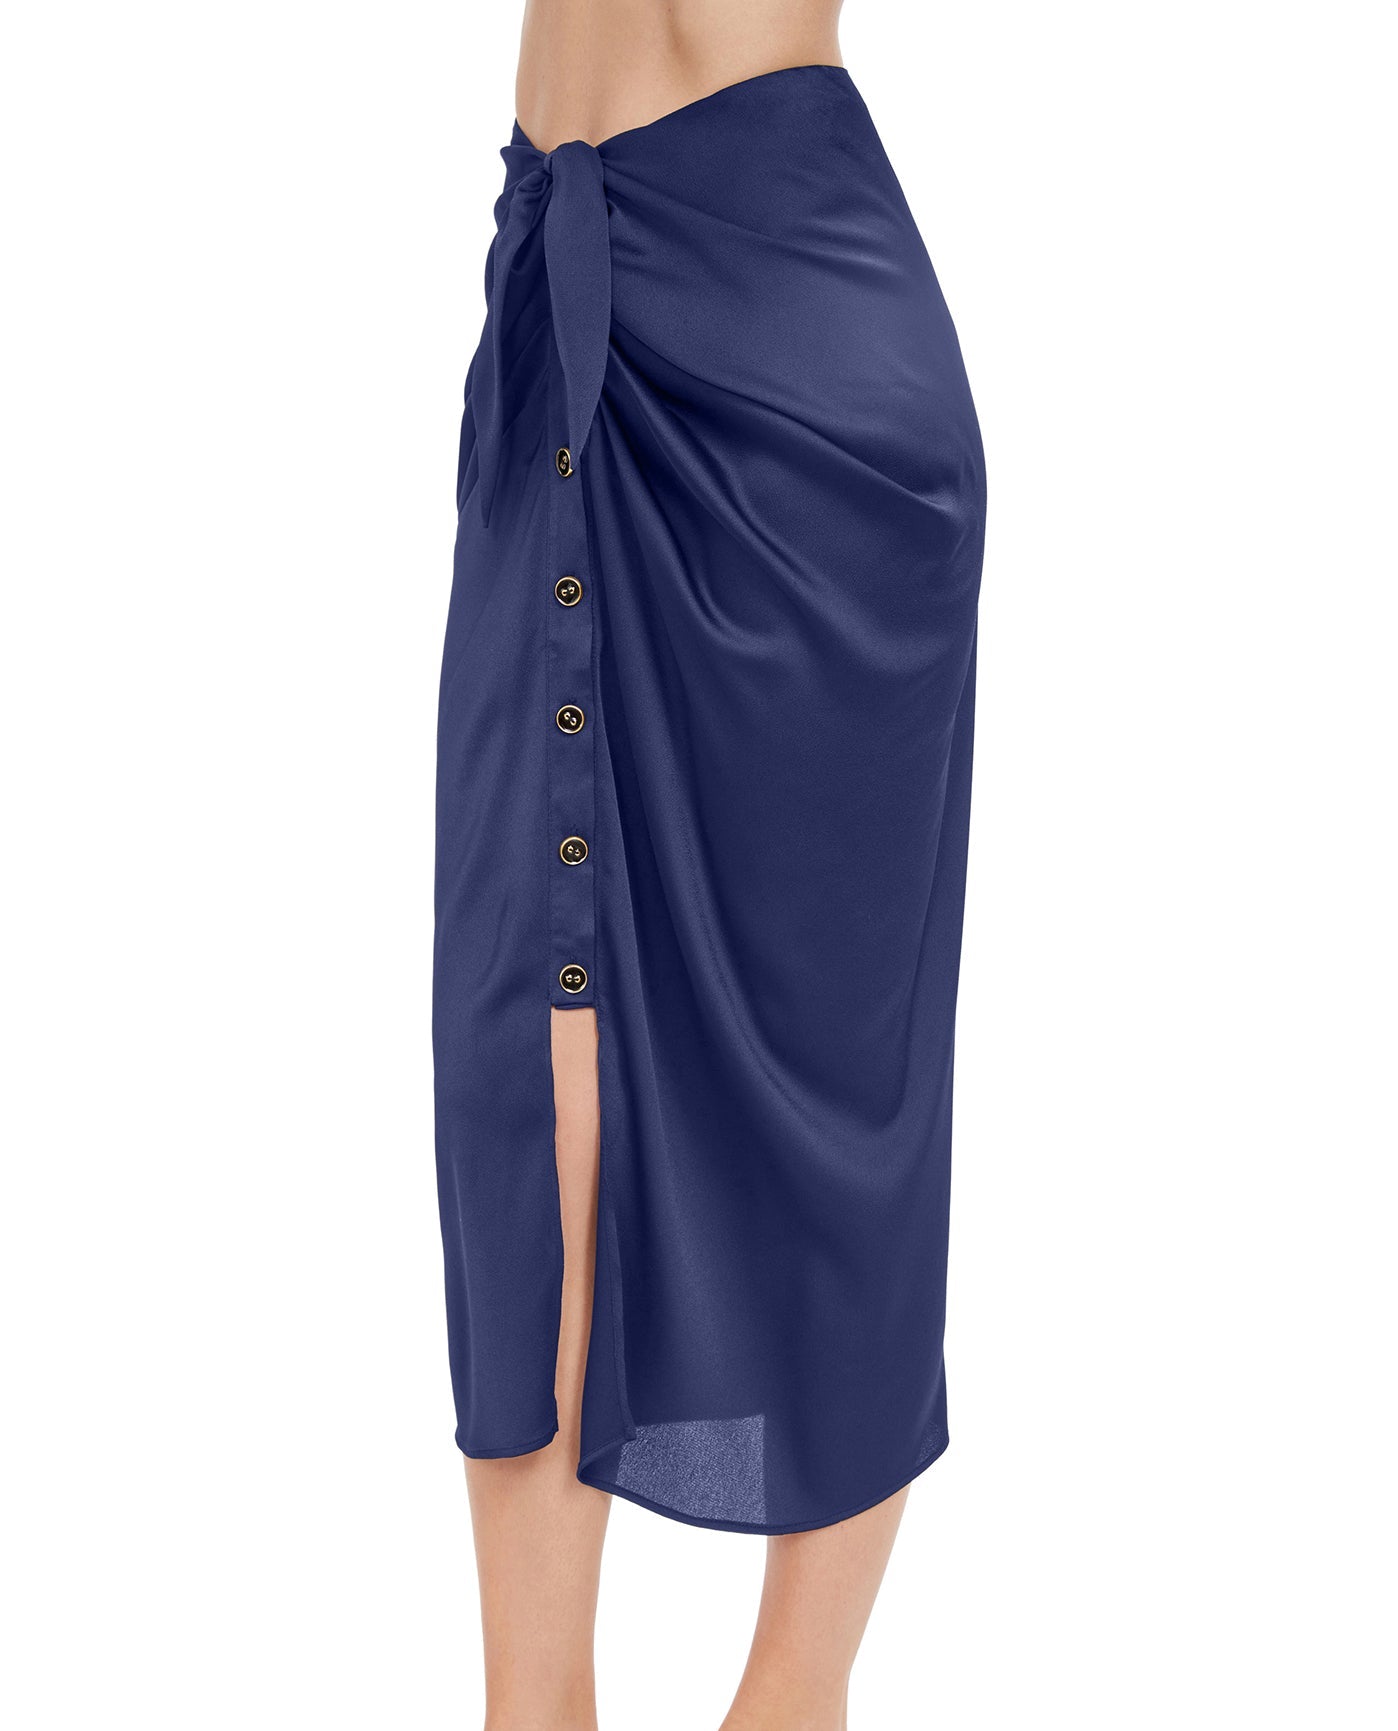 Side View View Of Gottex Classic High Class Tied Sarong-Style Cover Up Skirt | Gottex High Class Navy